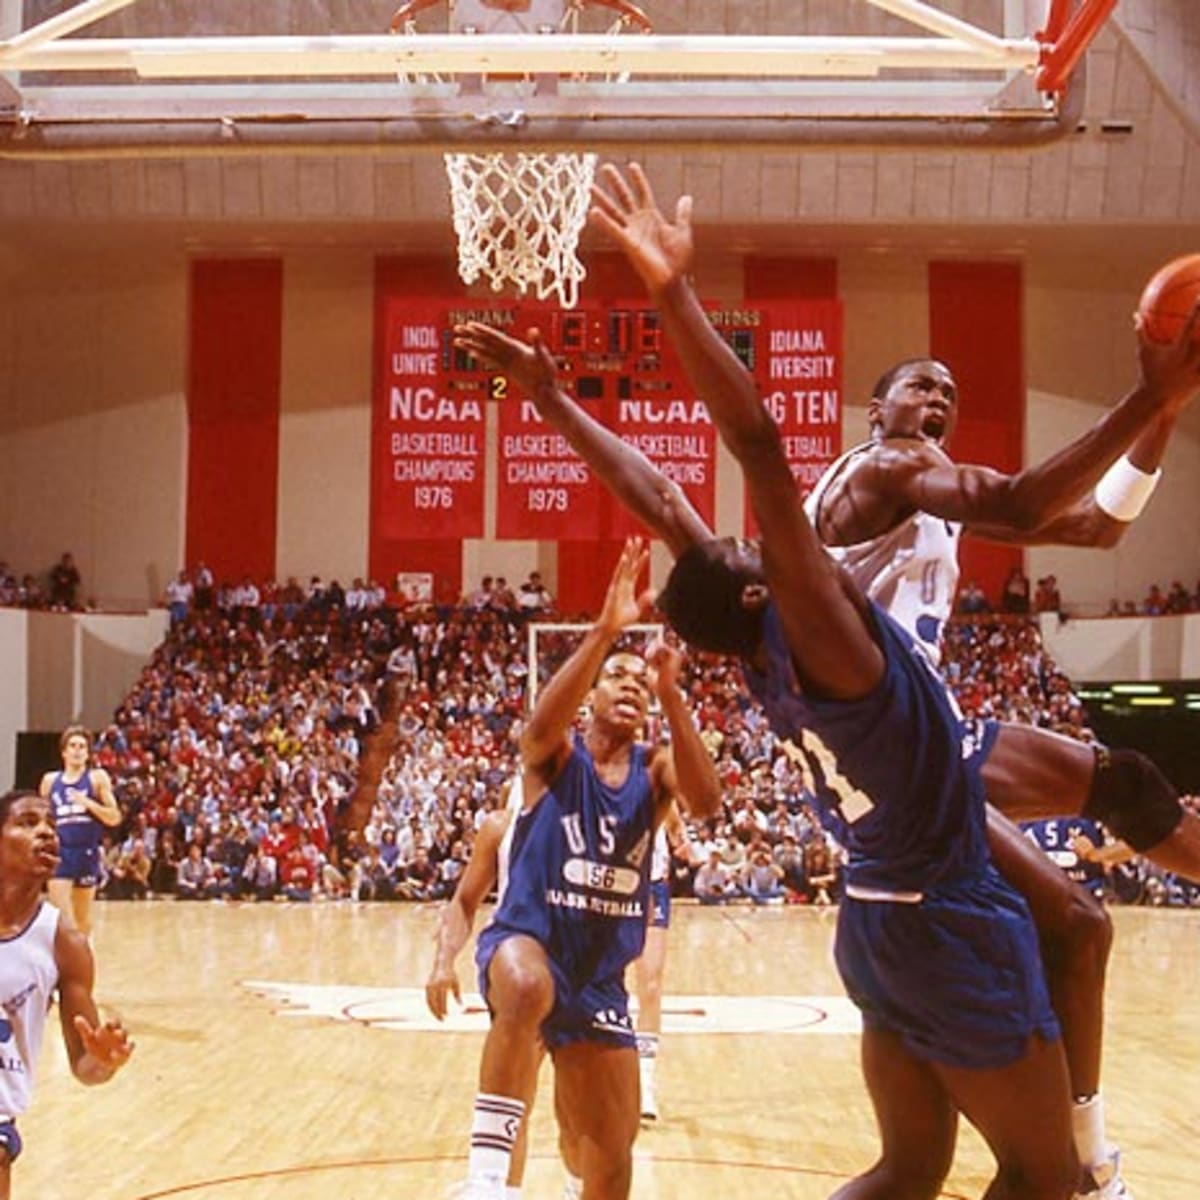 What if Michael Jordan was drafted by the Rockets in 1984? - The Dream Shake